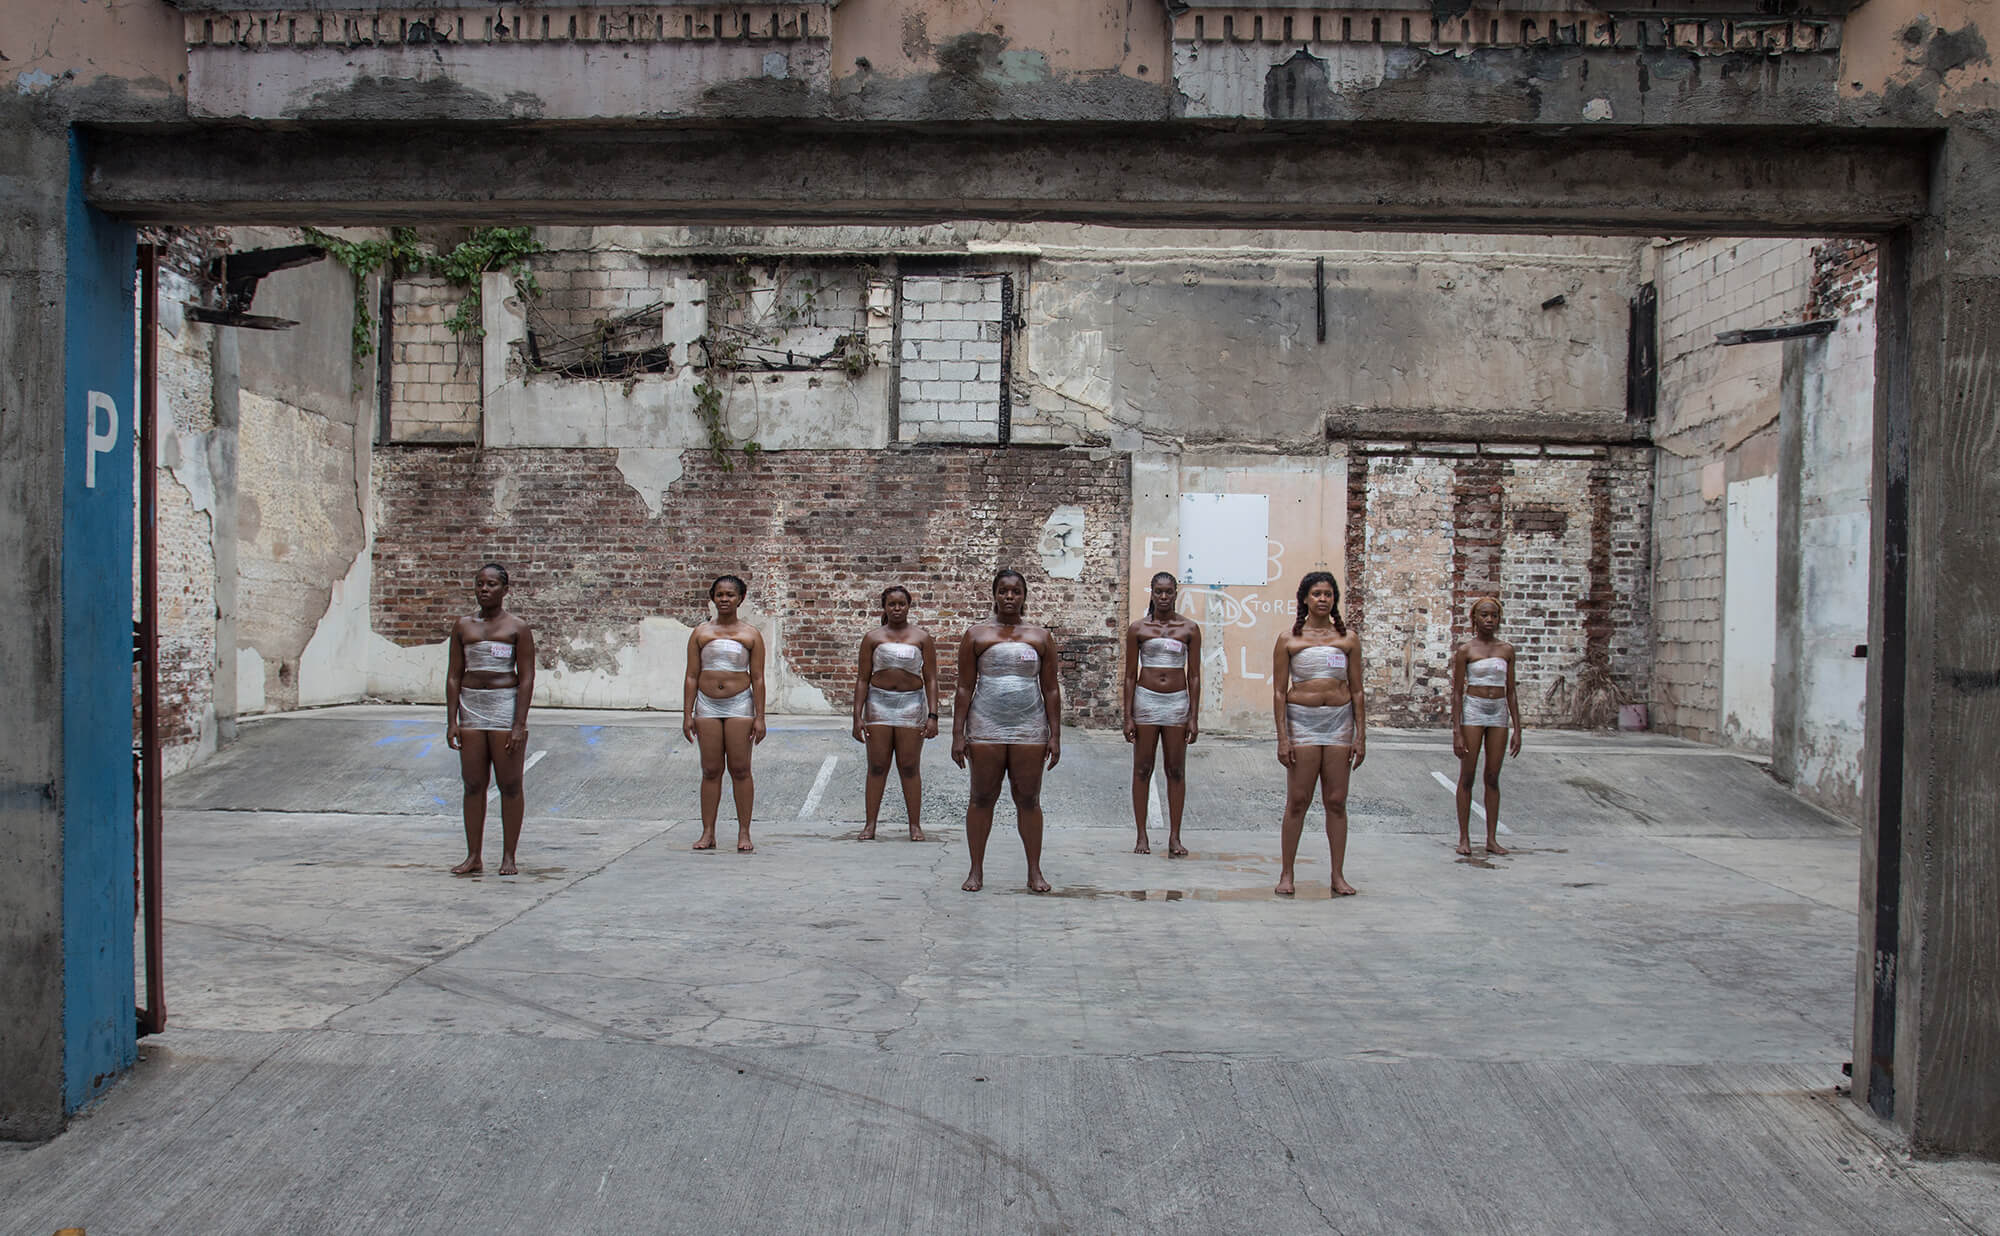 A group of seven Black women stand in a concrete space. They all wear plastic wrap. The photo is documentation of “Woman for Sale,” an experimental performance installation. The performance intended to physicalize the "meat market" of women as inanimate objects, priced according to the cultural beauty standards surrounding complexion, age, weight, hair texture, and shape.